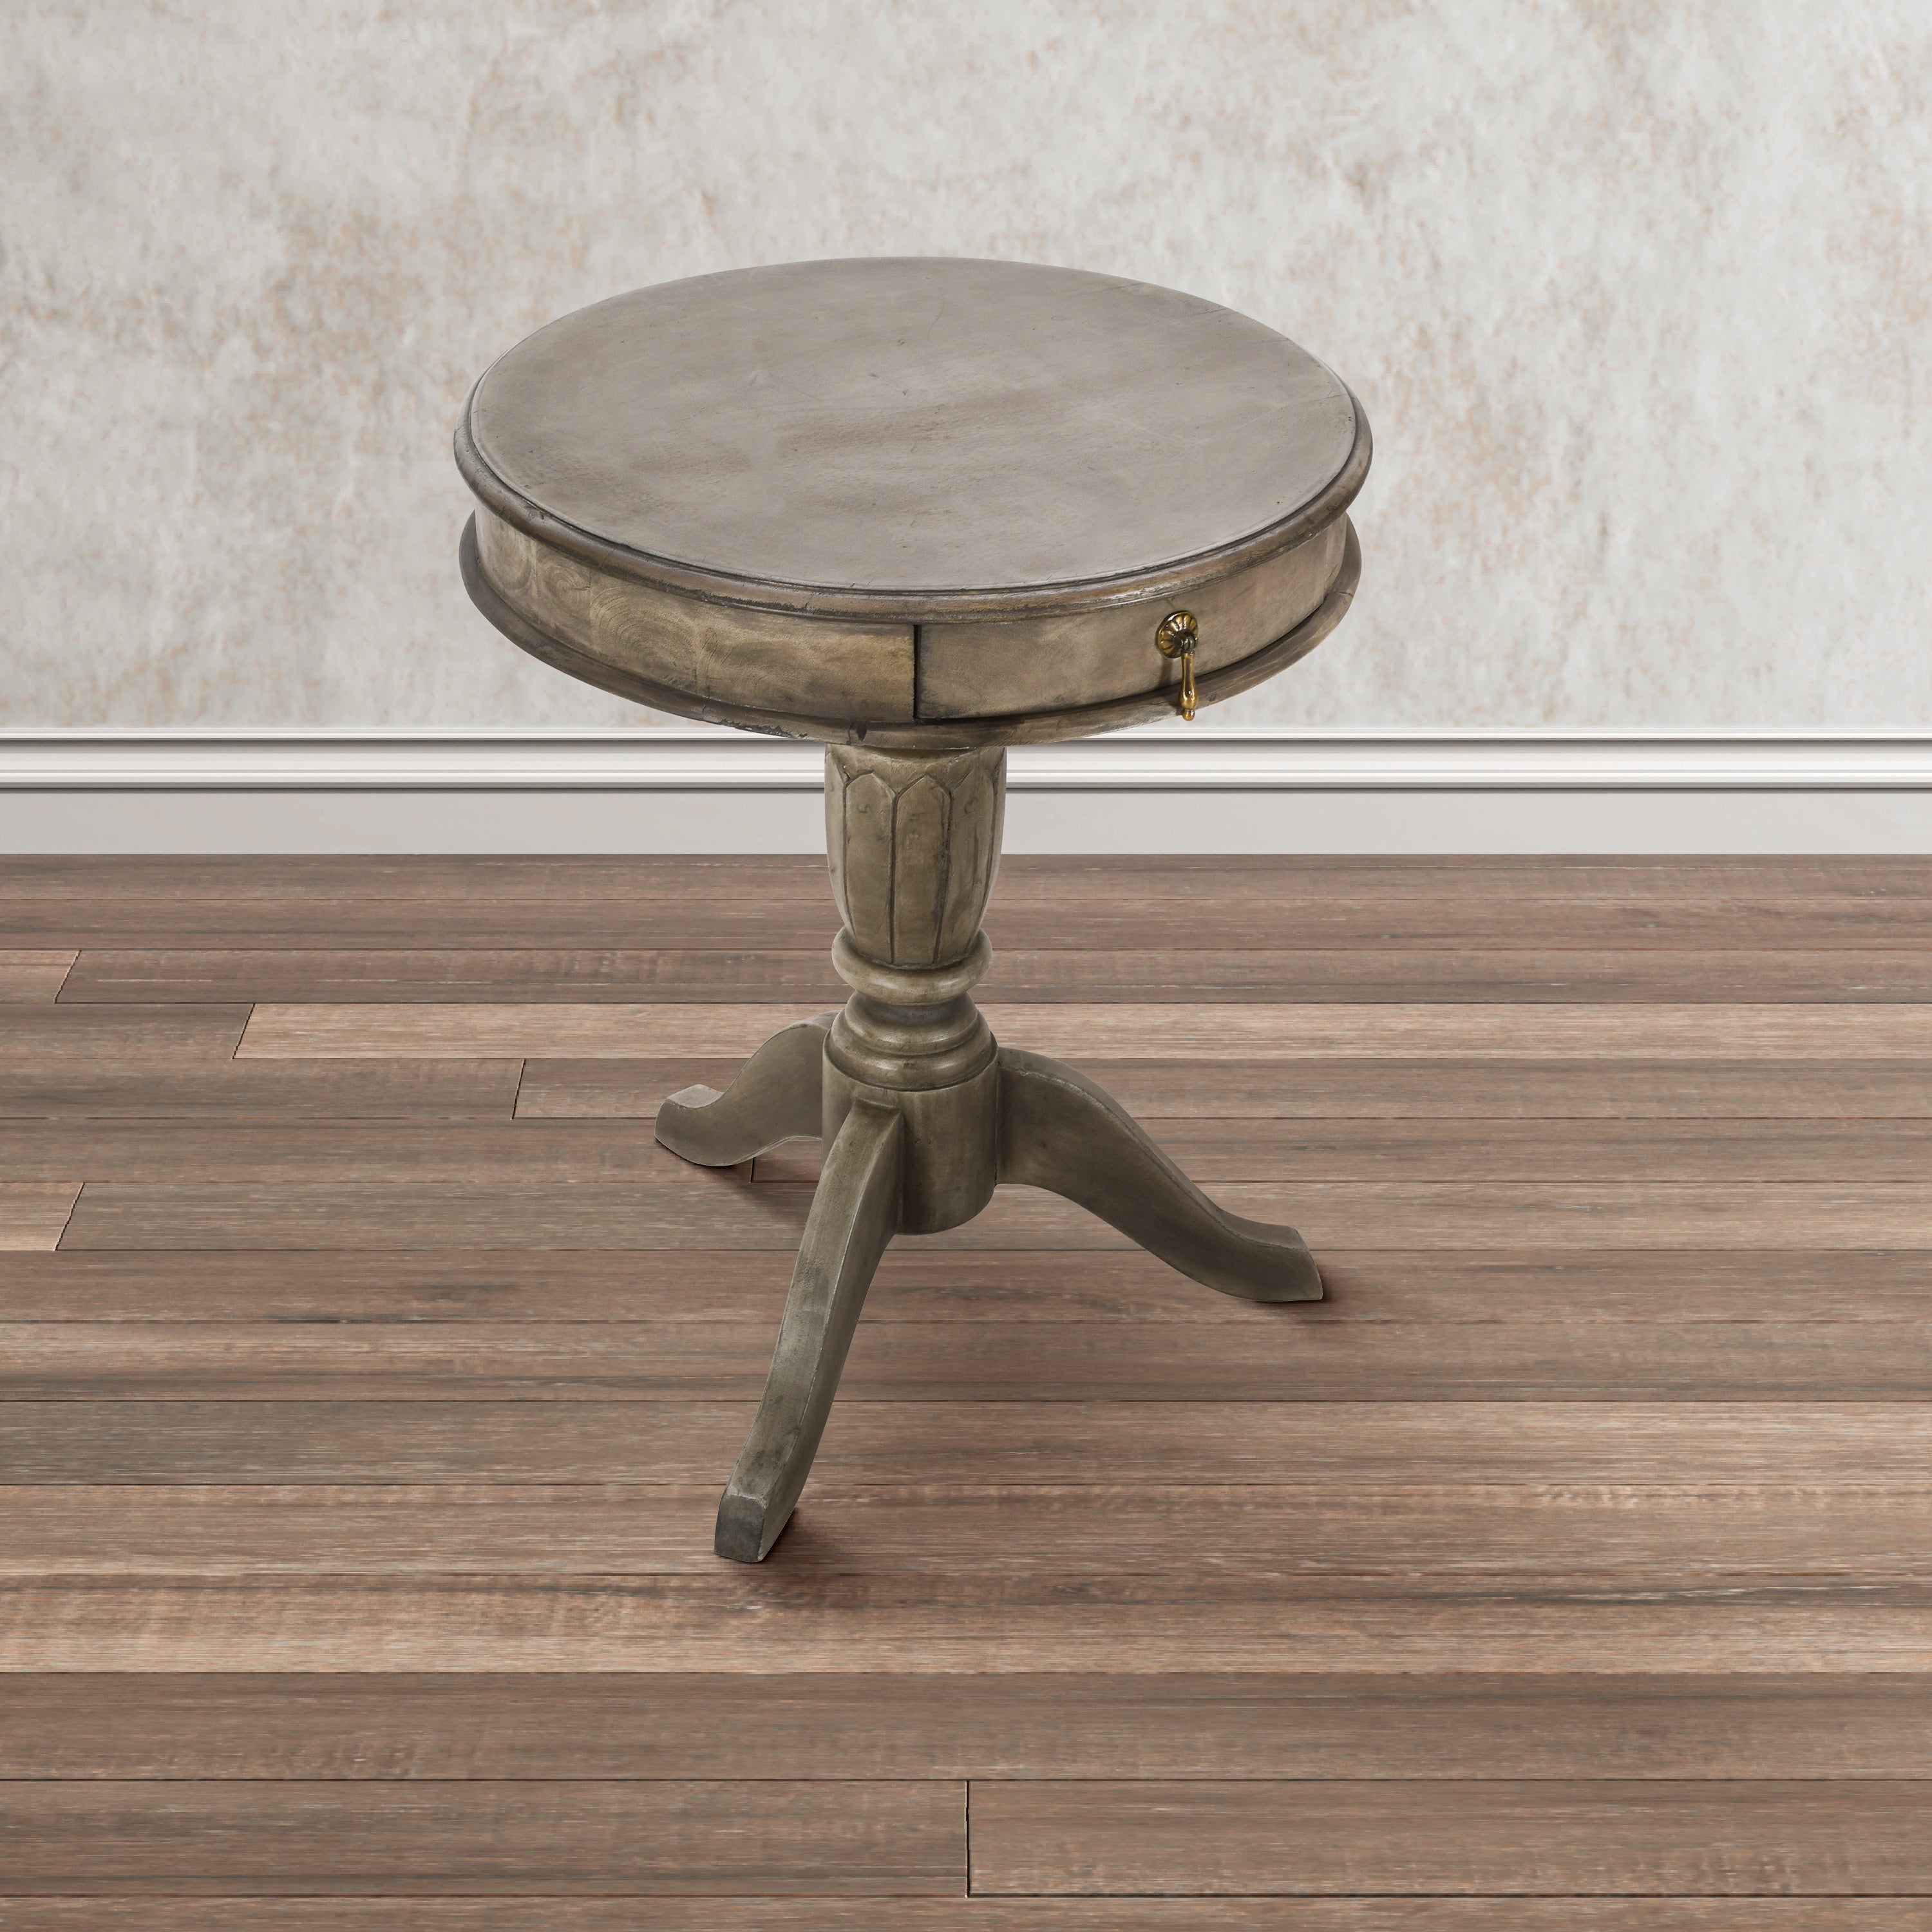 21-inch side table